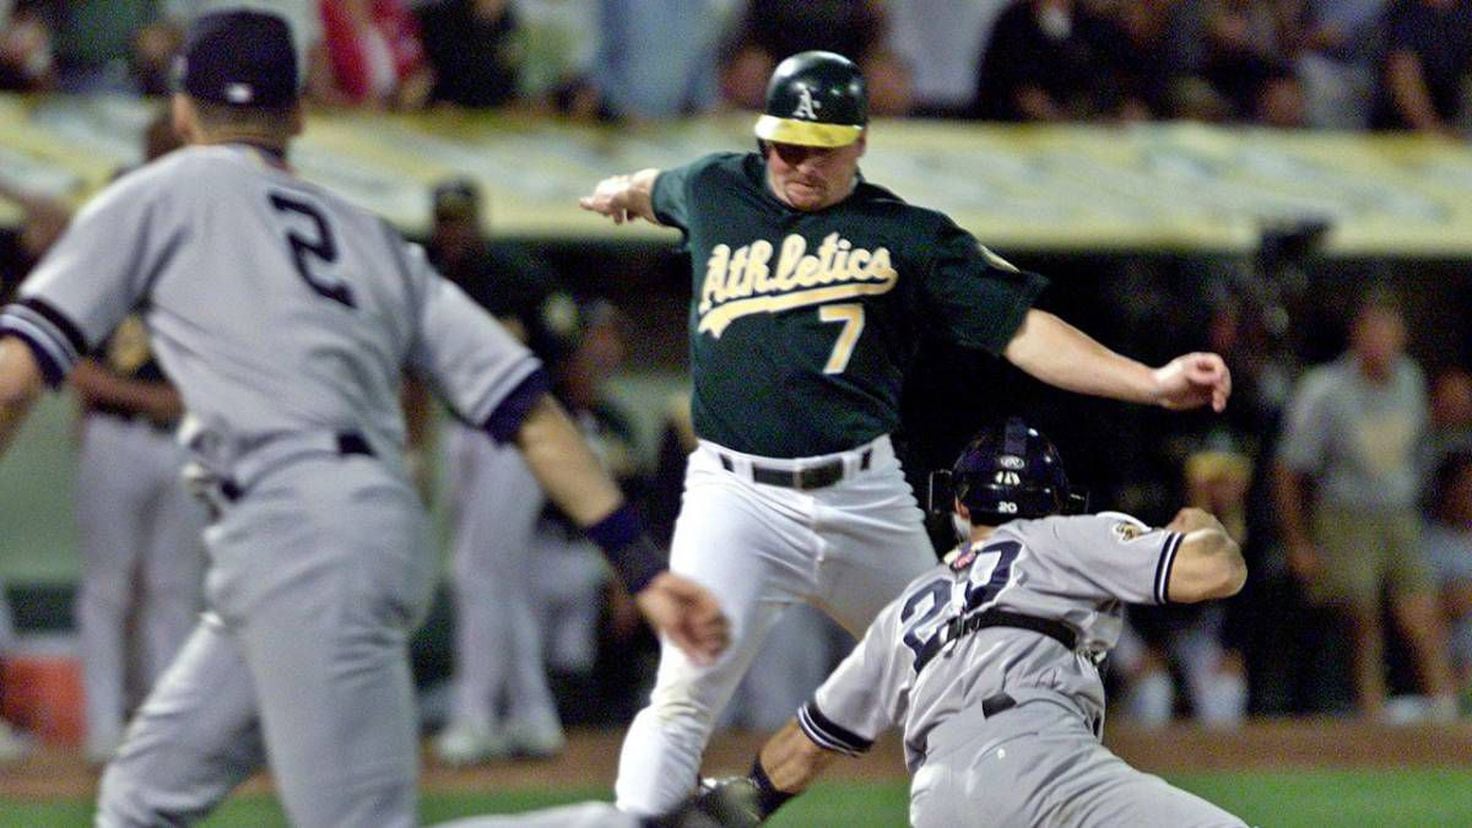 MLB News: Former Oakland A's star Jeremy Giambi passes away at age